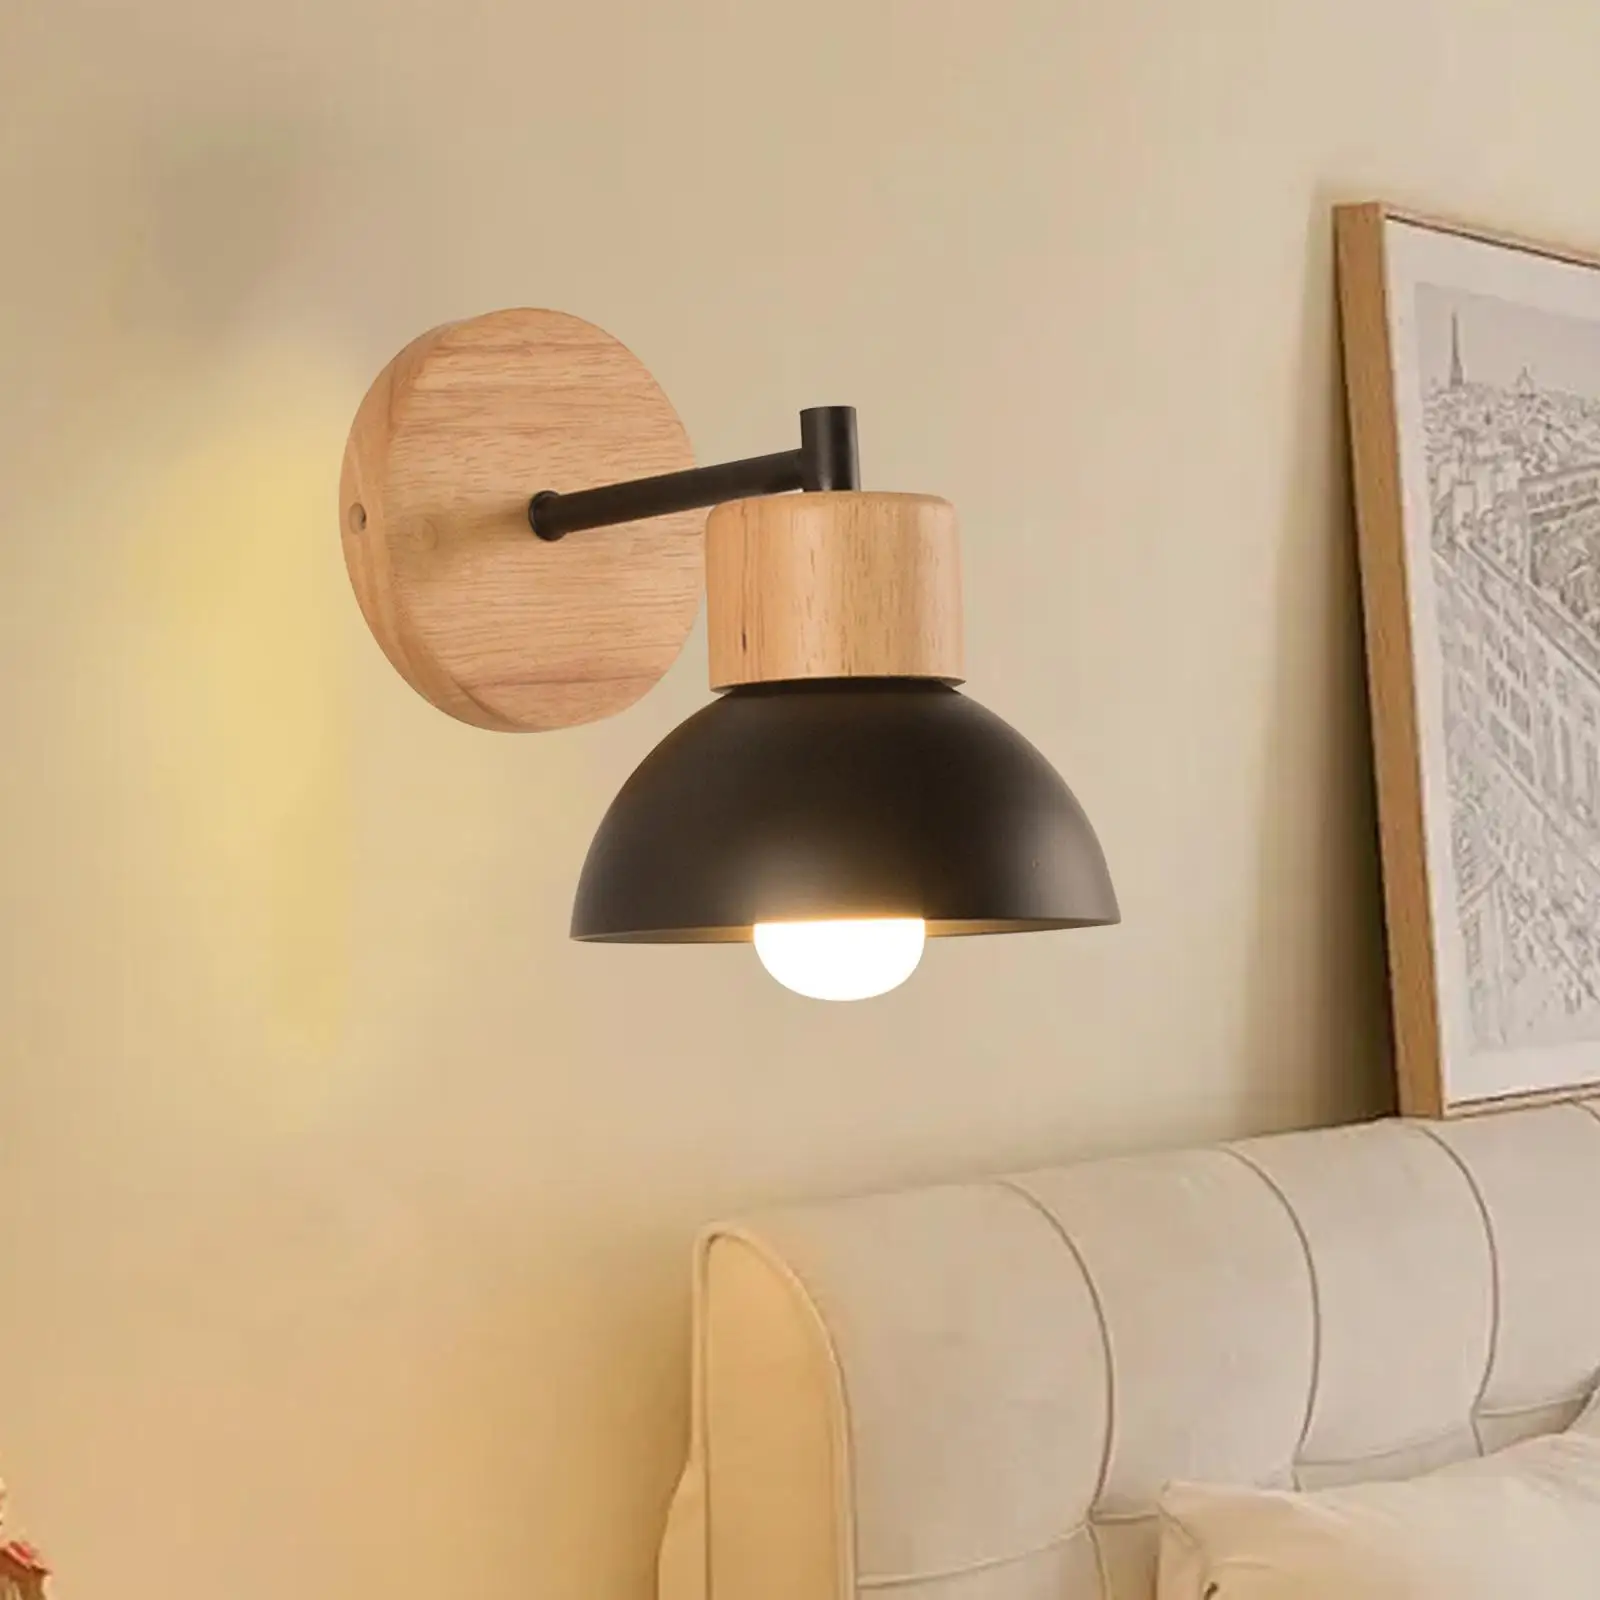 Home Wall Mounted Lamp, Lighting Fixtures with Wood Base, Bulbs Not Included E27